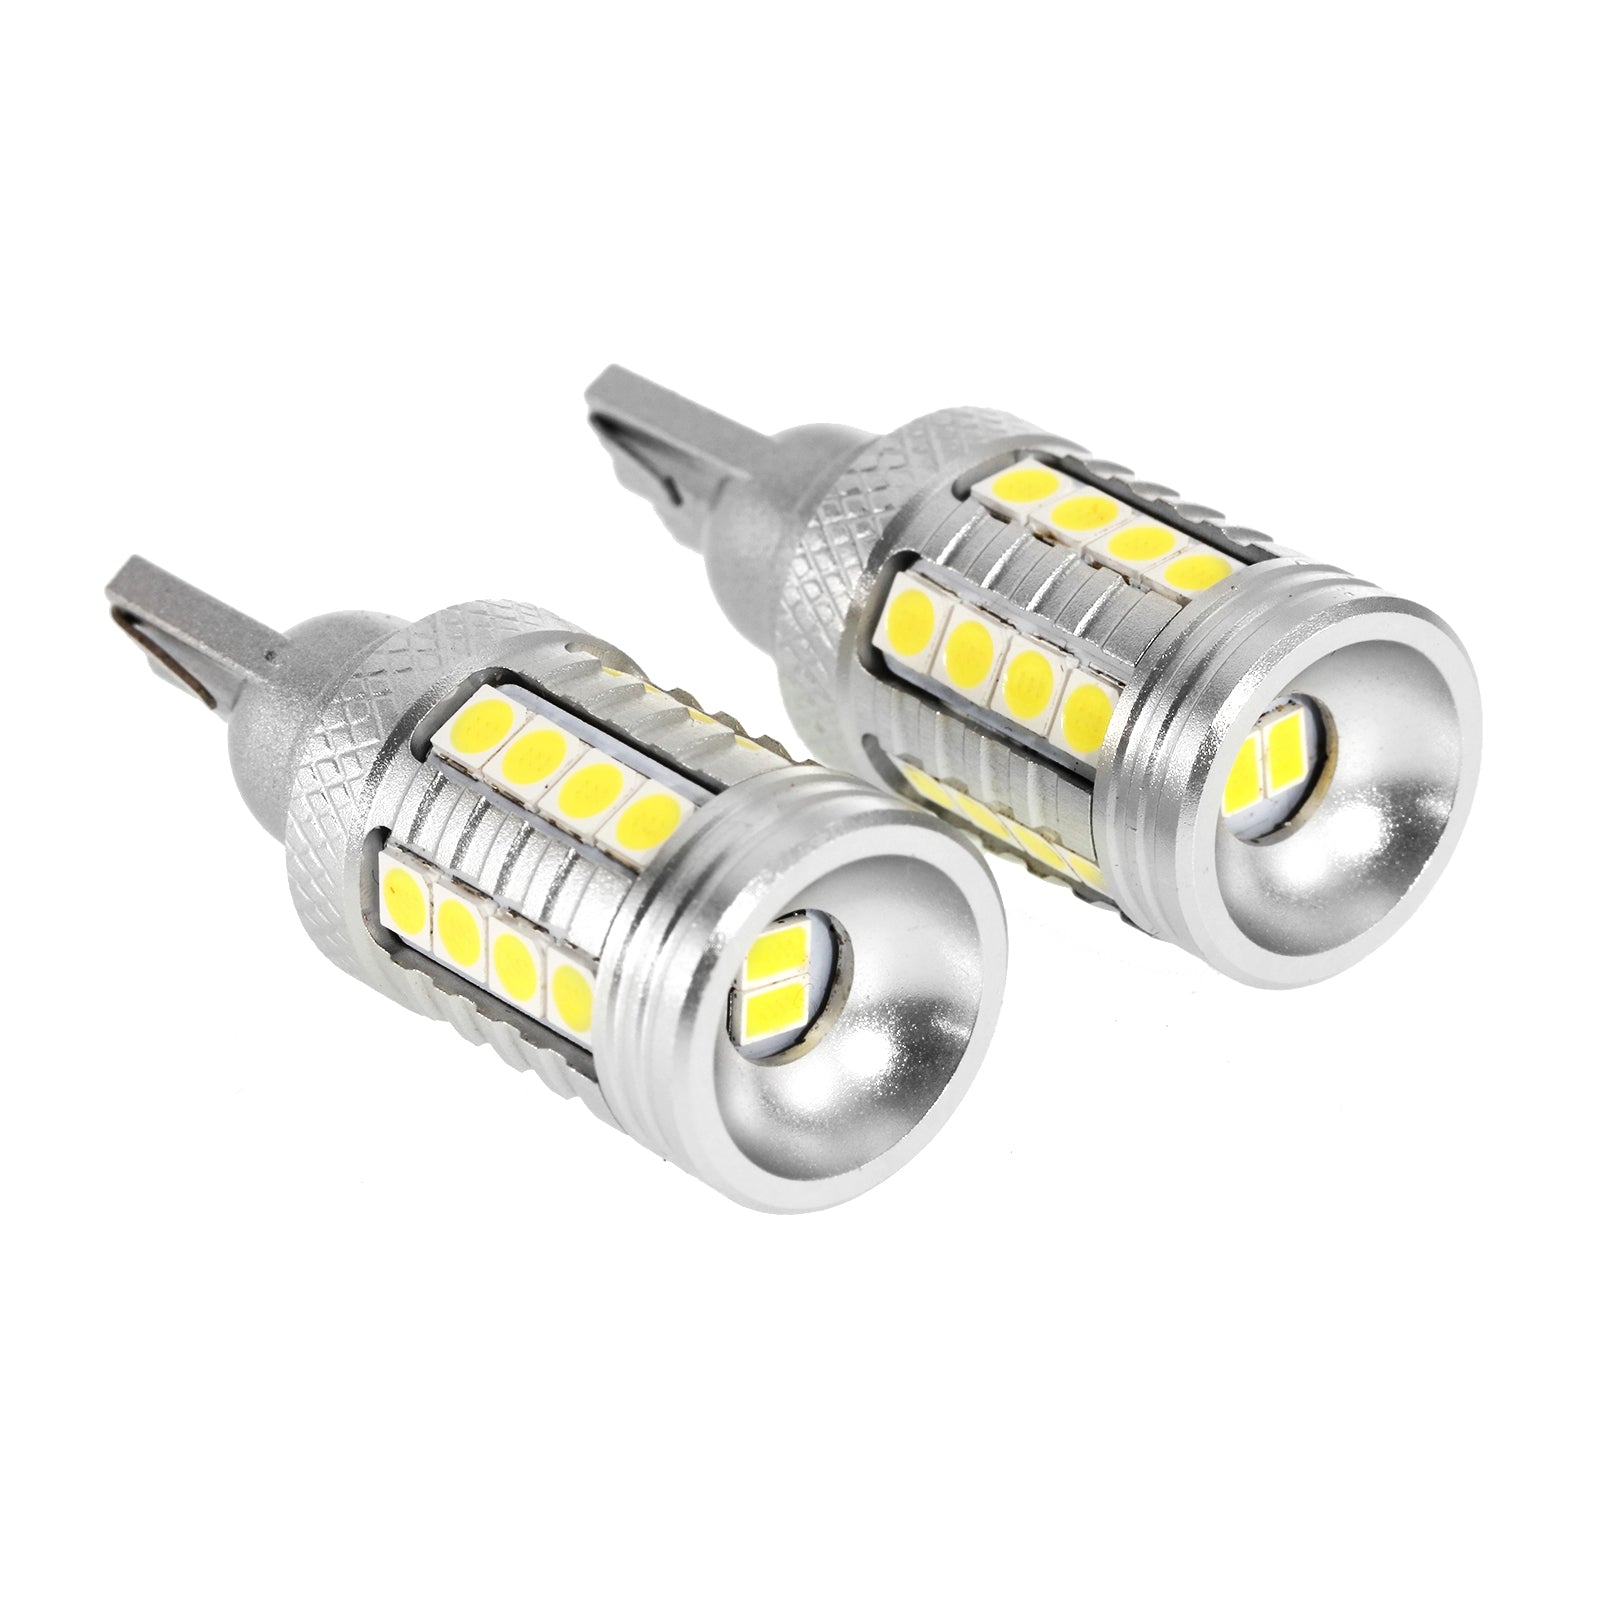 KATUR T15 W16W 921 912 T16 902 LED Bulb High Power 20pcs 3030SMD Extremely  Bright 2000 LM Replace for Car Reversing Light Backup Parking Light Tail